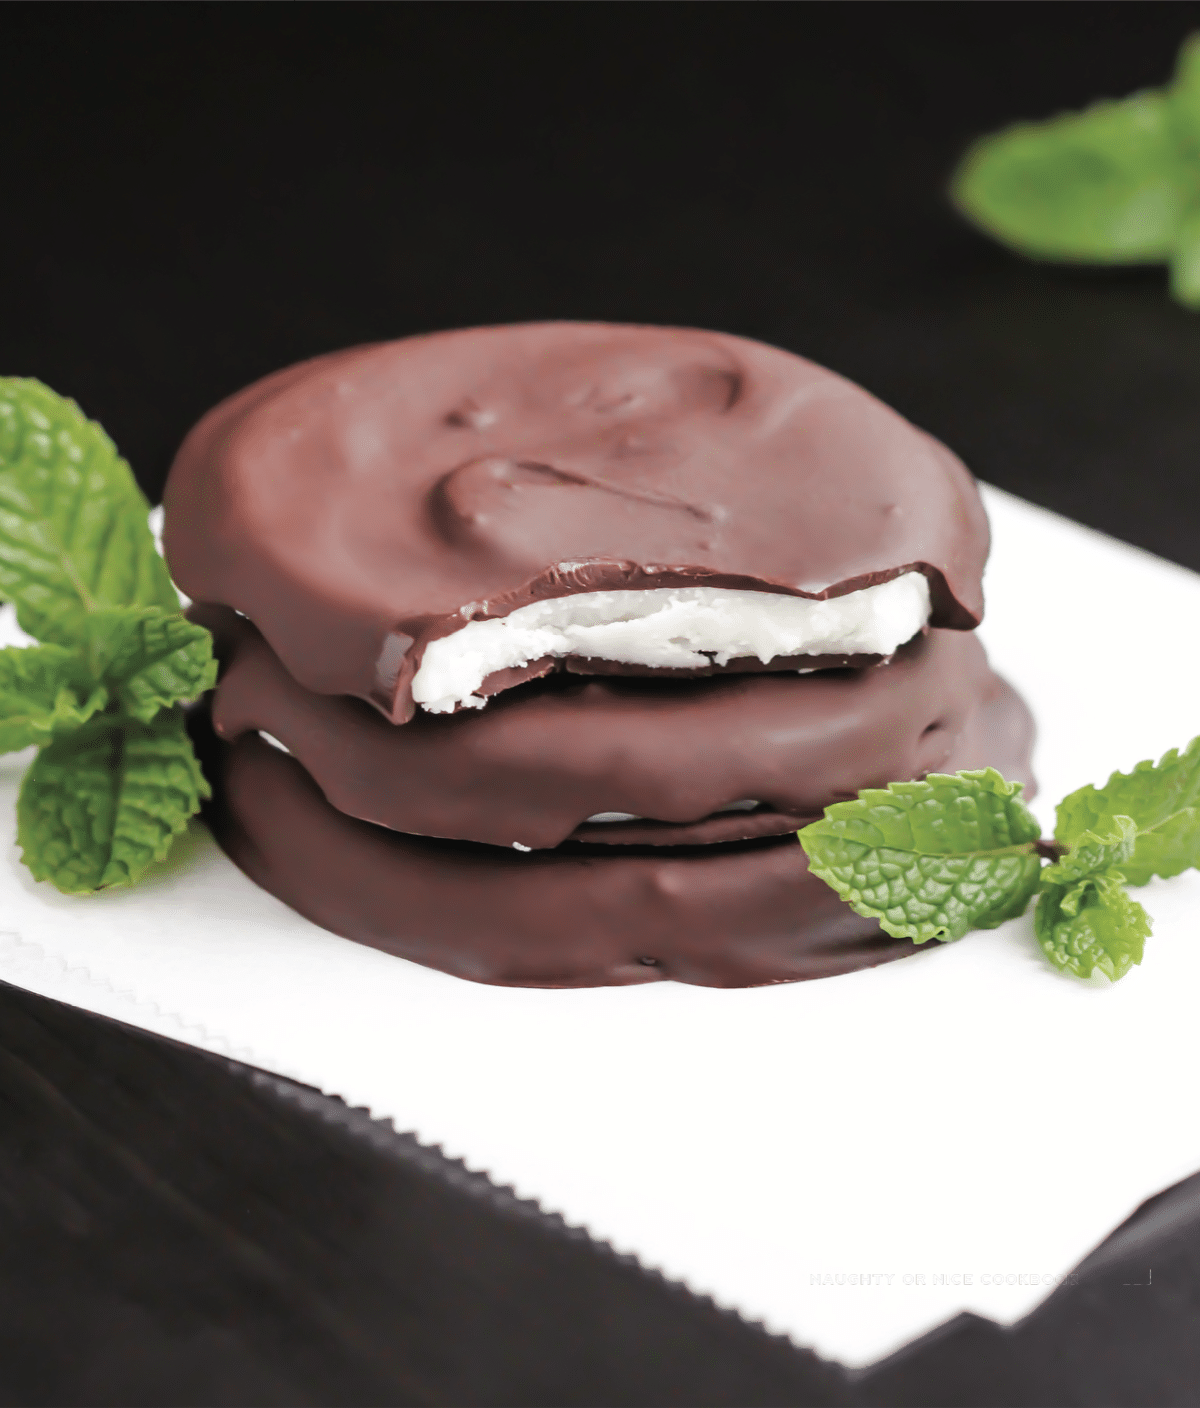 Healthy Homemade Peppermint Patties recipe | DIY Reese’s (refined sugar free, low carb, gluten free, vegan) - Healthy Dessert Recipes at Desserts with Benefits